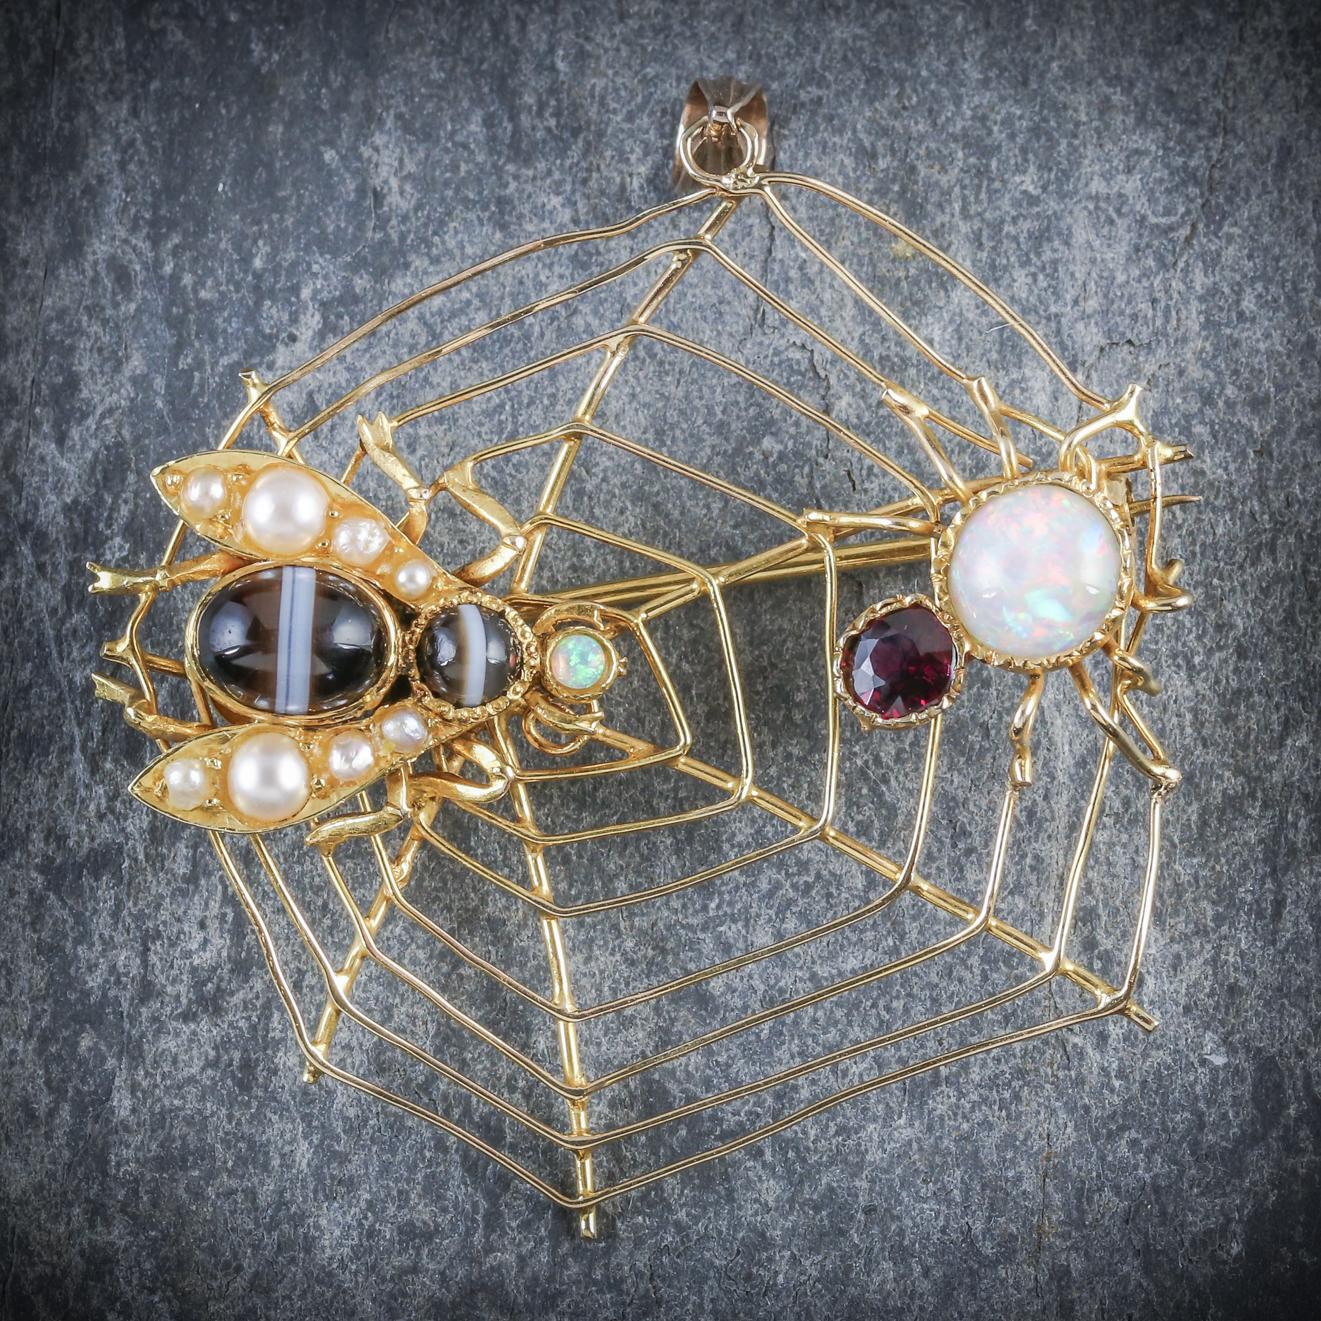 This enchanting antique insect brooch is Victorian Circa 1900

The fabulous piece depicts a fly and spider decorated with Garnets, Opals, Pearls and banded Agates on a 15ct Yellow Gold web.

The piece is fitted with a Gold loop as well as a sturdy